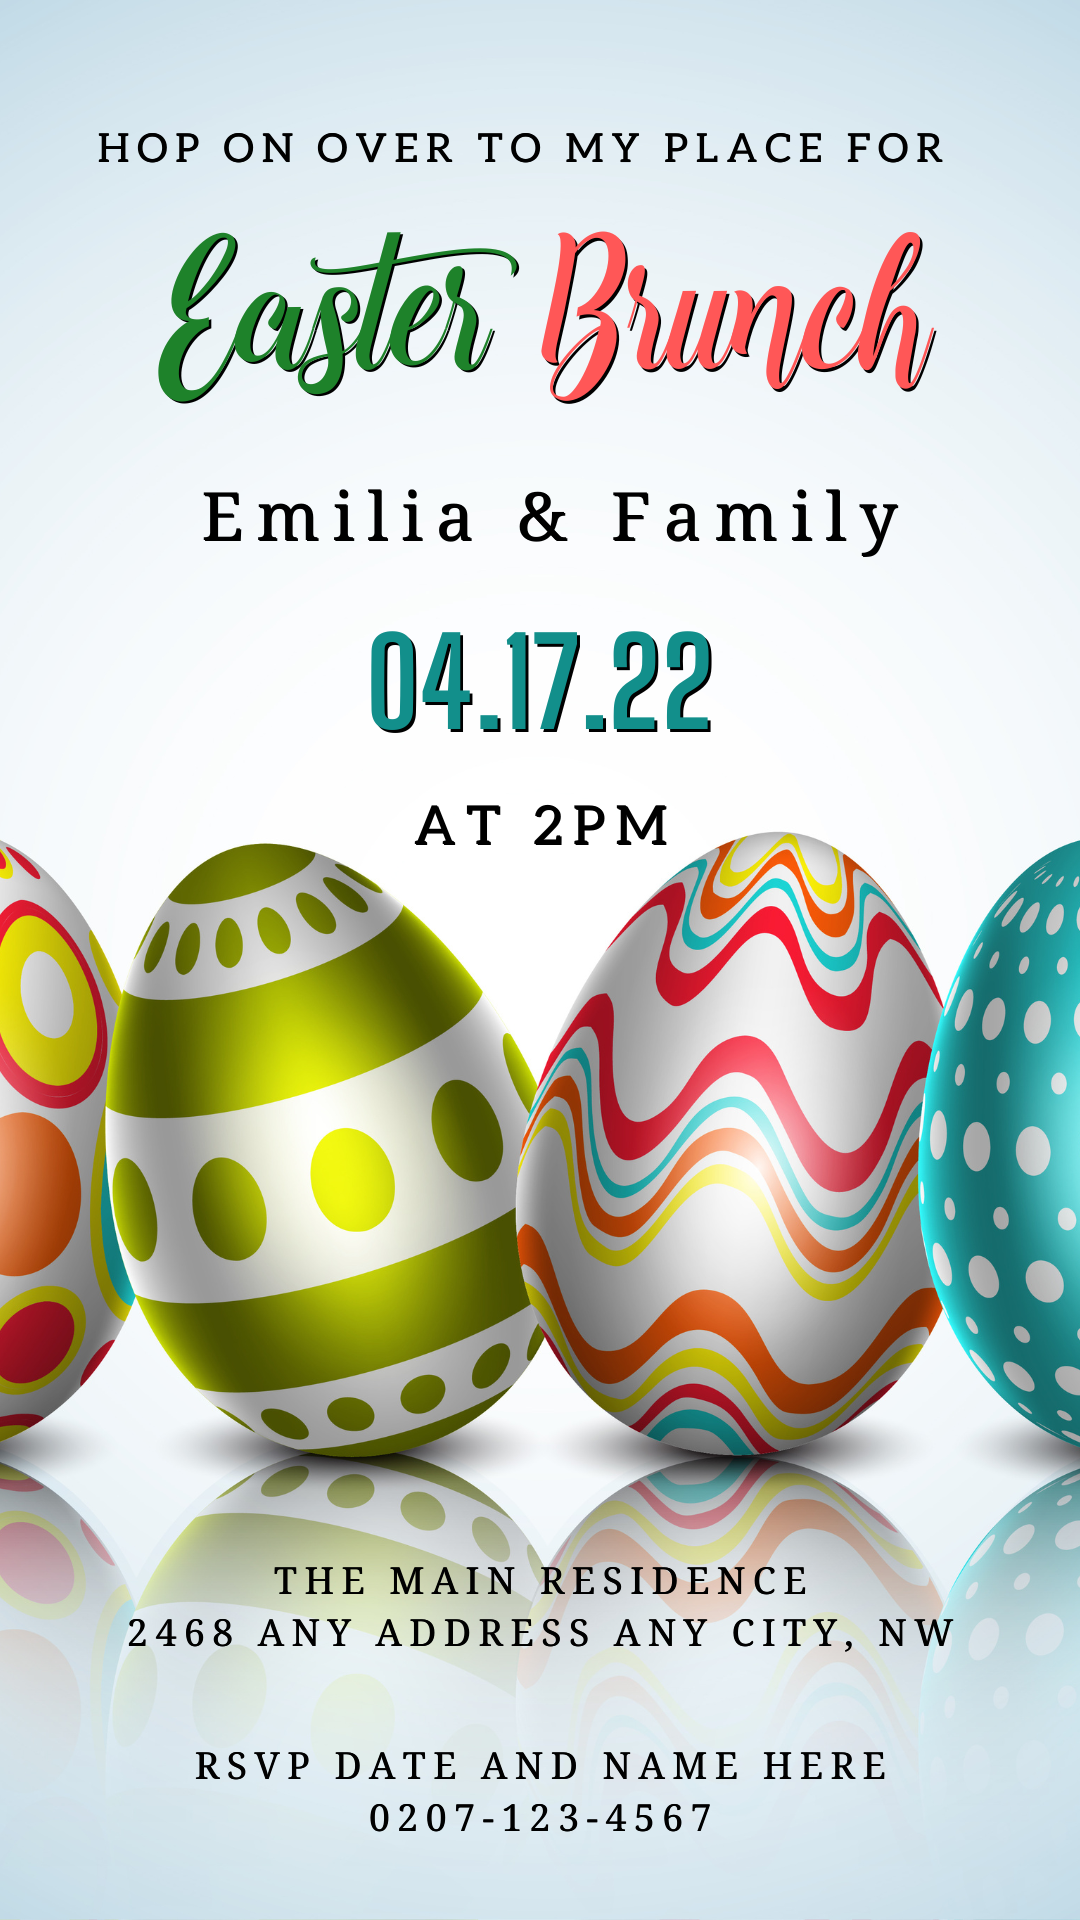 Colourful Easter Eggs | Easter Brunch Party Evite, featuring editable digital eggs on a customizable template for easy personalization via smartphone or PC using Canva.